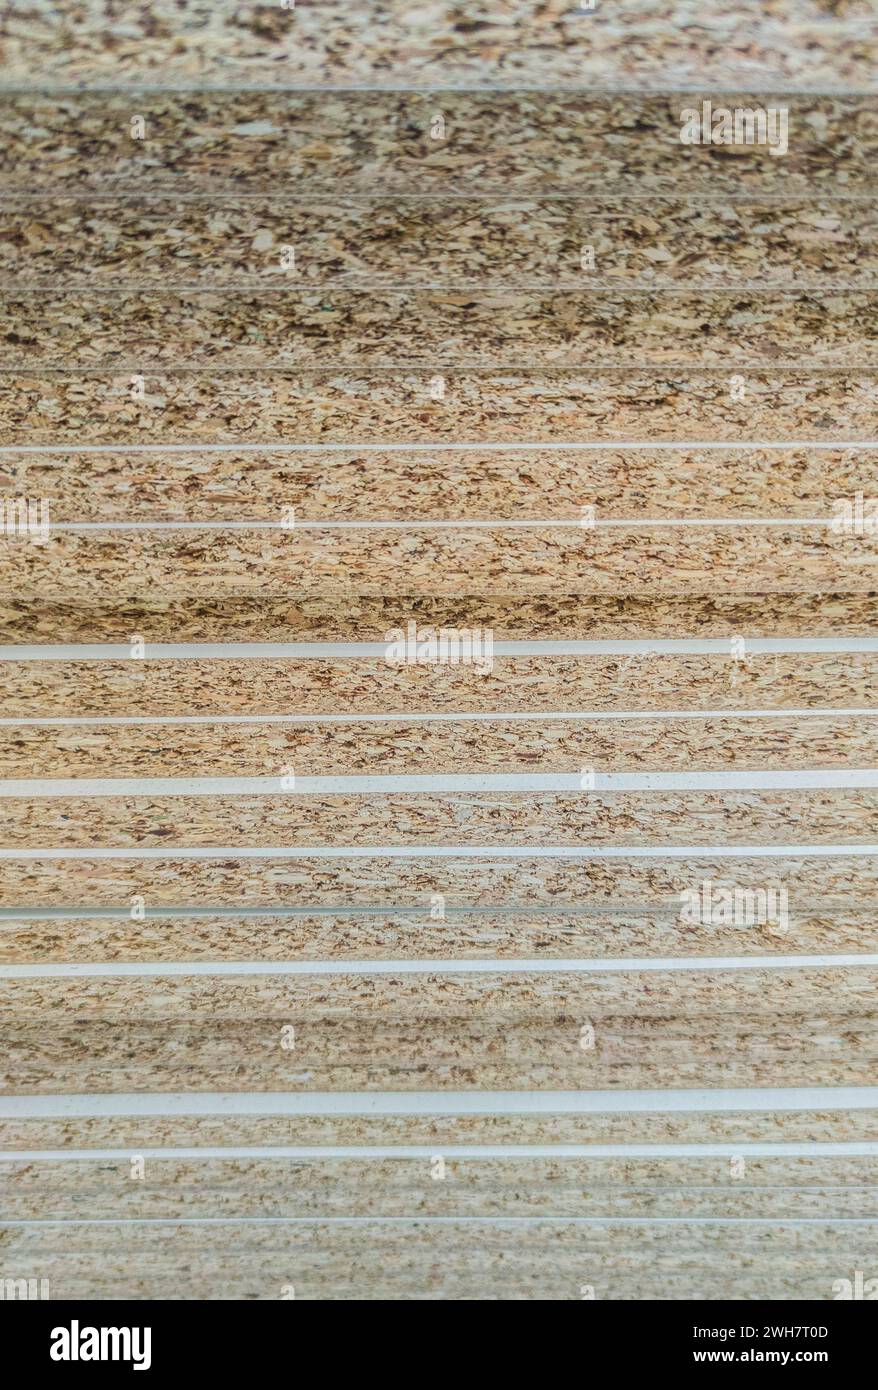 Veneer particle boards pilled on high. Edge details Stock Photo